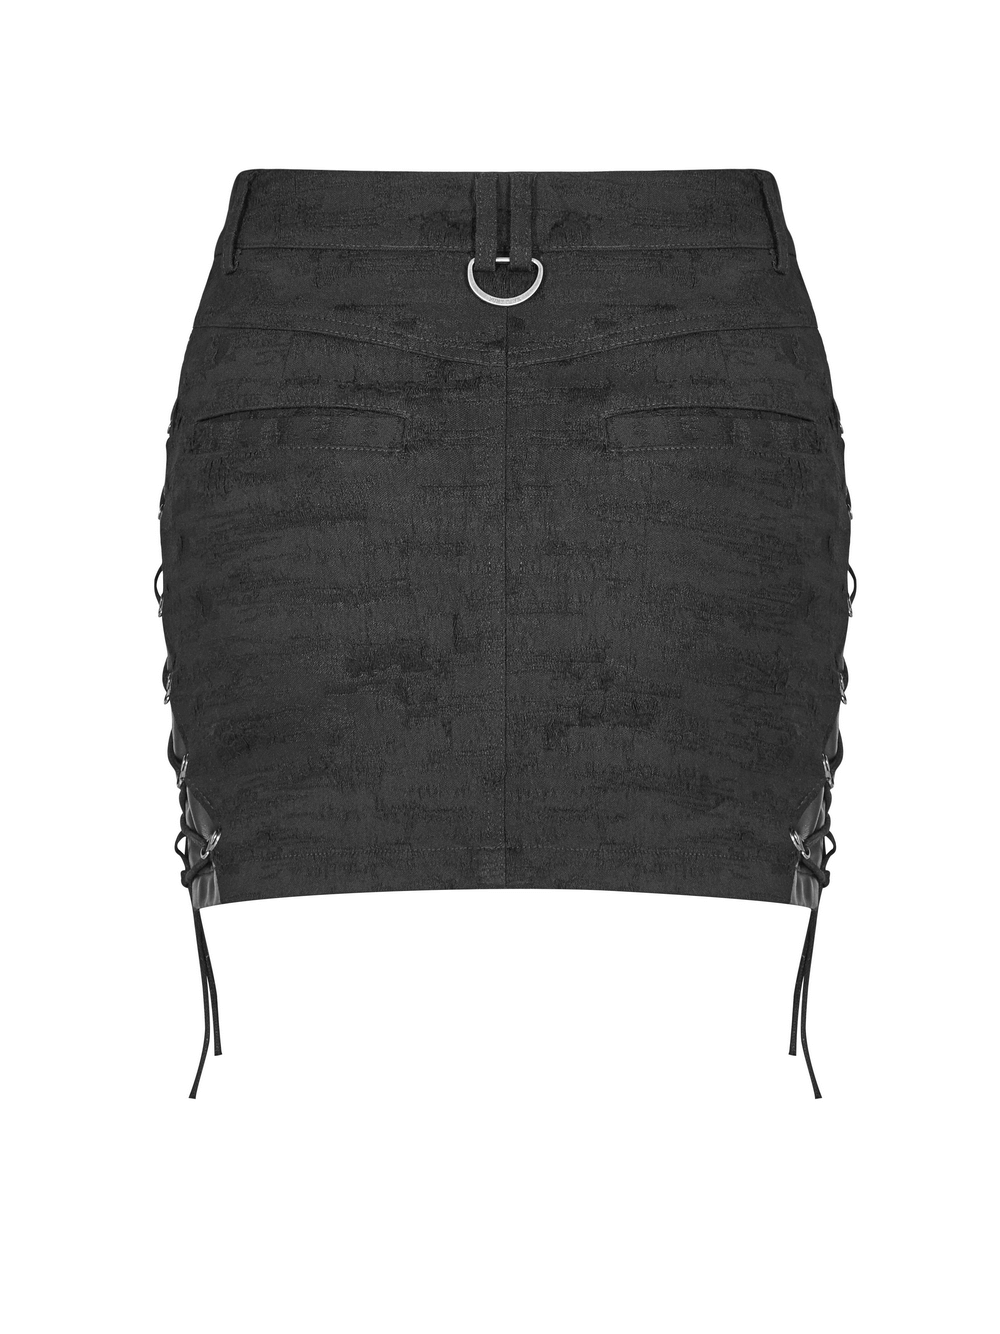 Edgy Punk Metal Half Skirt with Rivet and Rope Detail